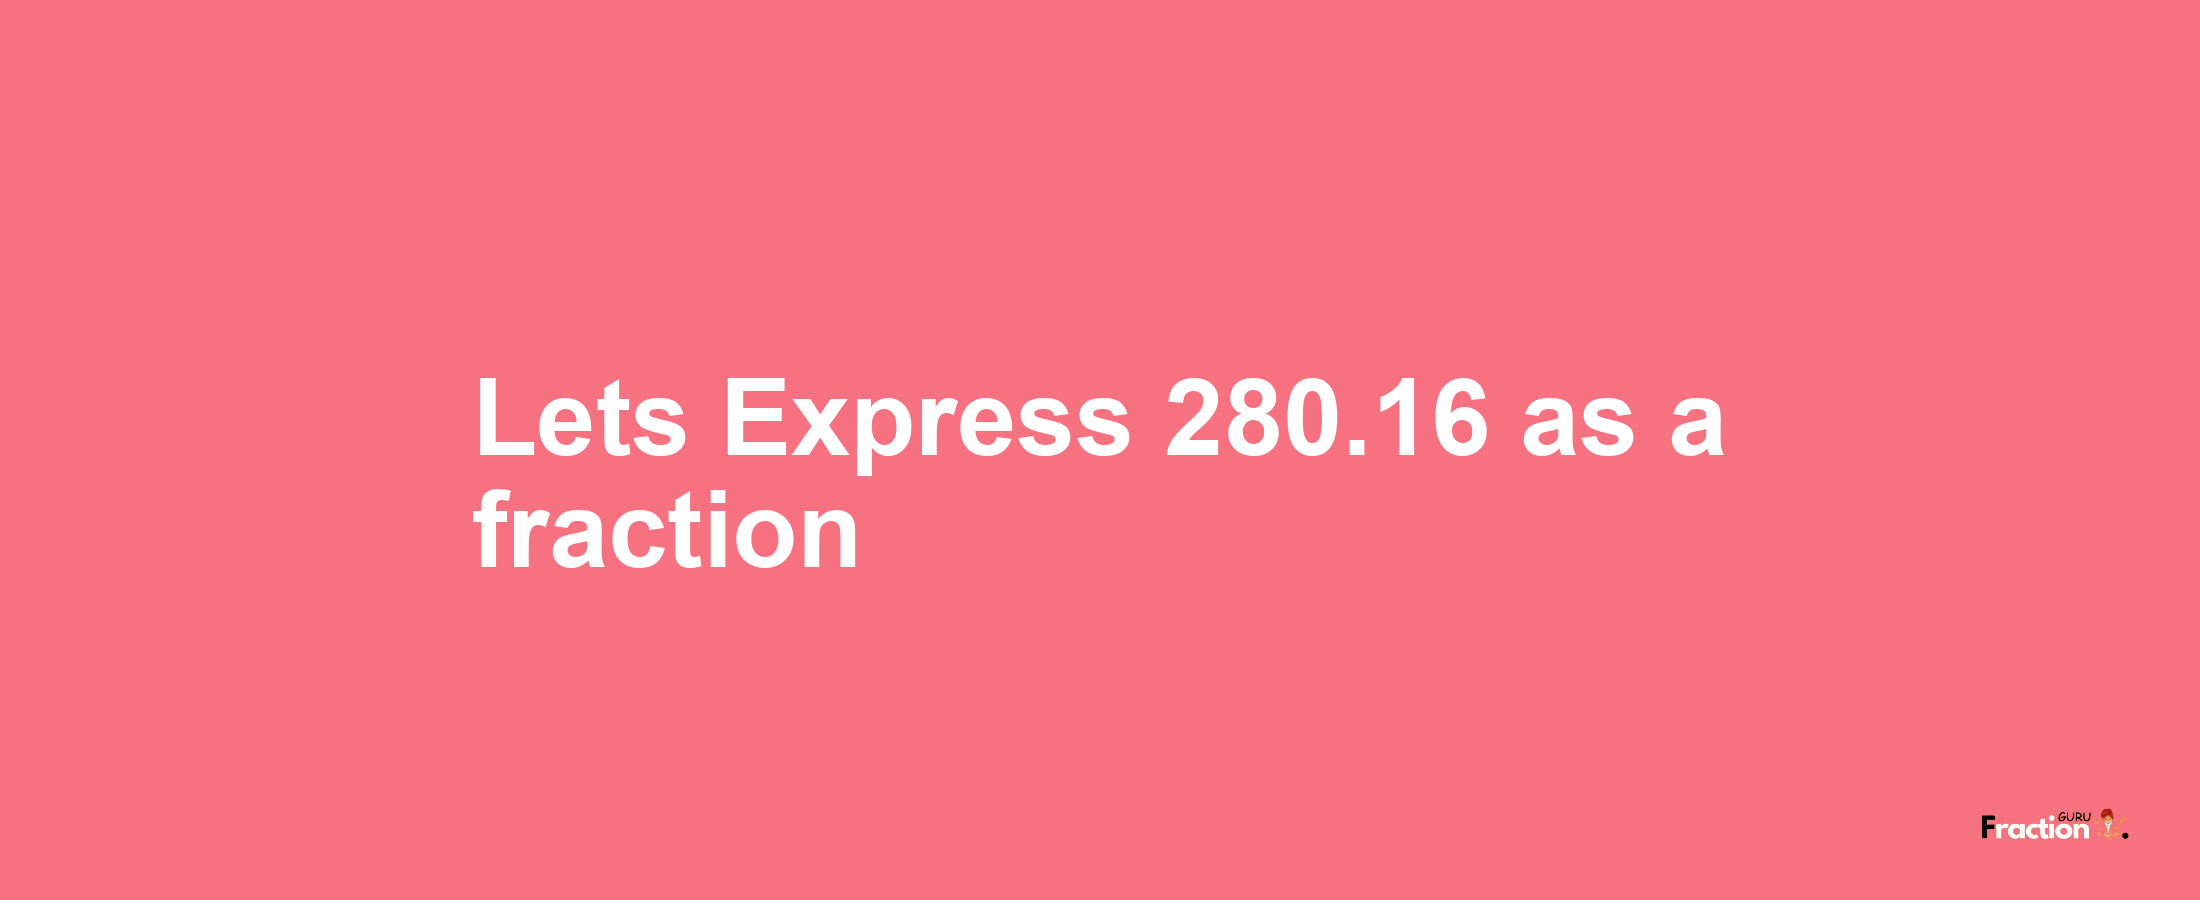 Lets Express 280.16 as afraction